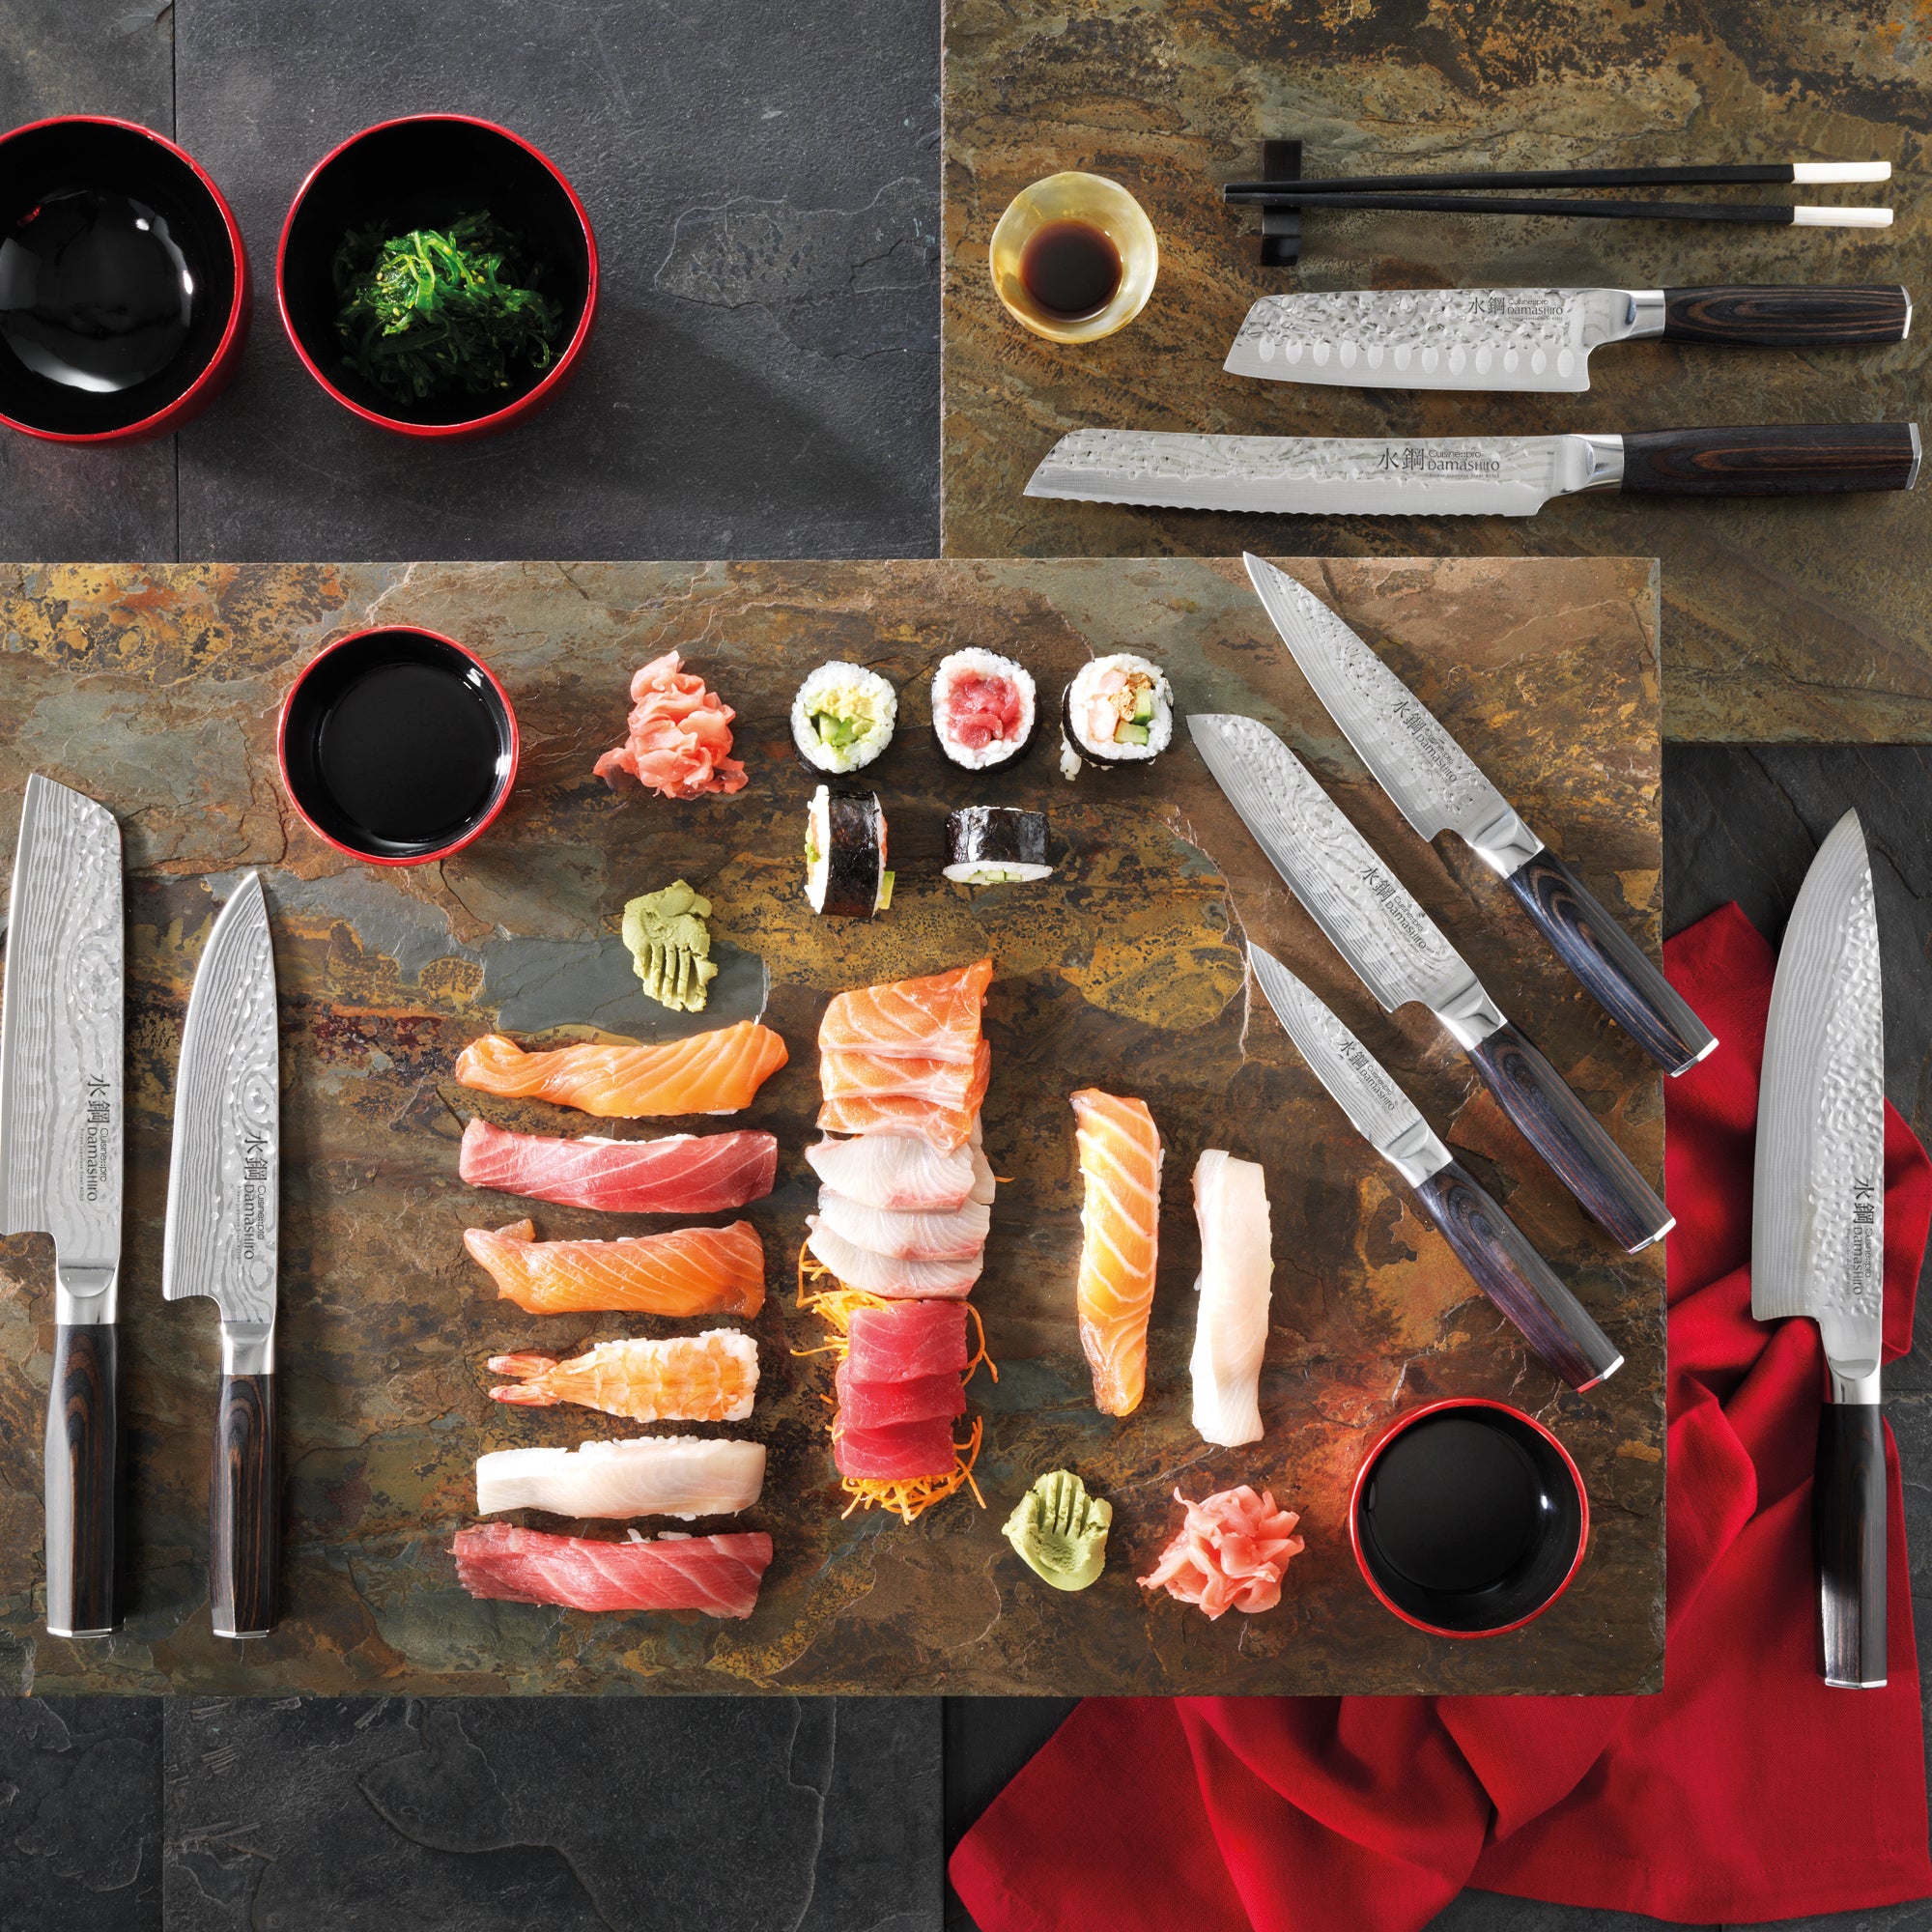 Enso HD Chef&s Knife 8-Inch - Japanese Kitchen Knives